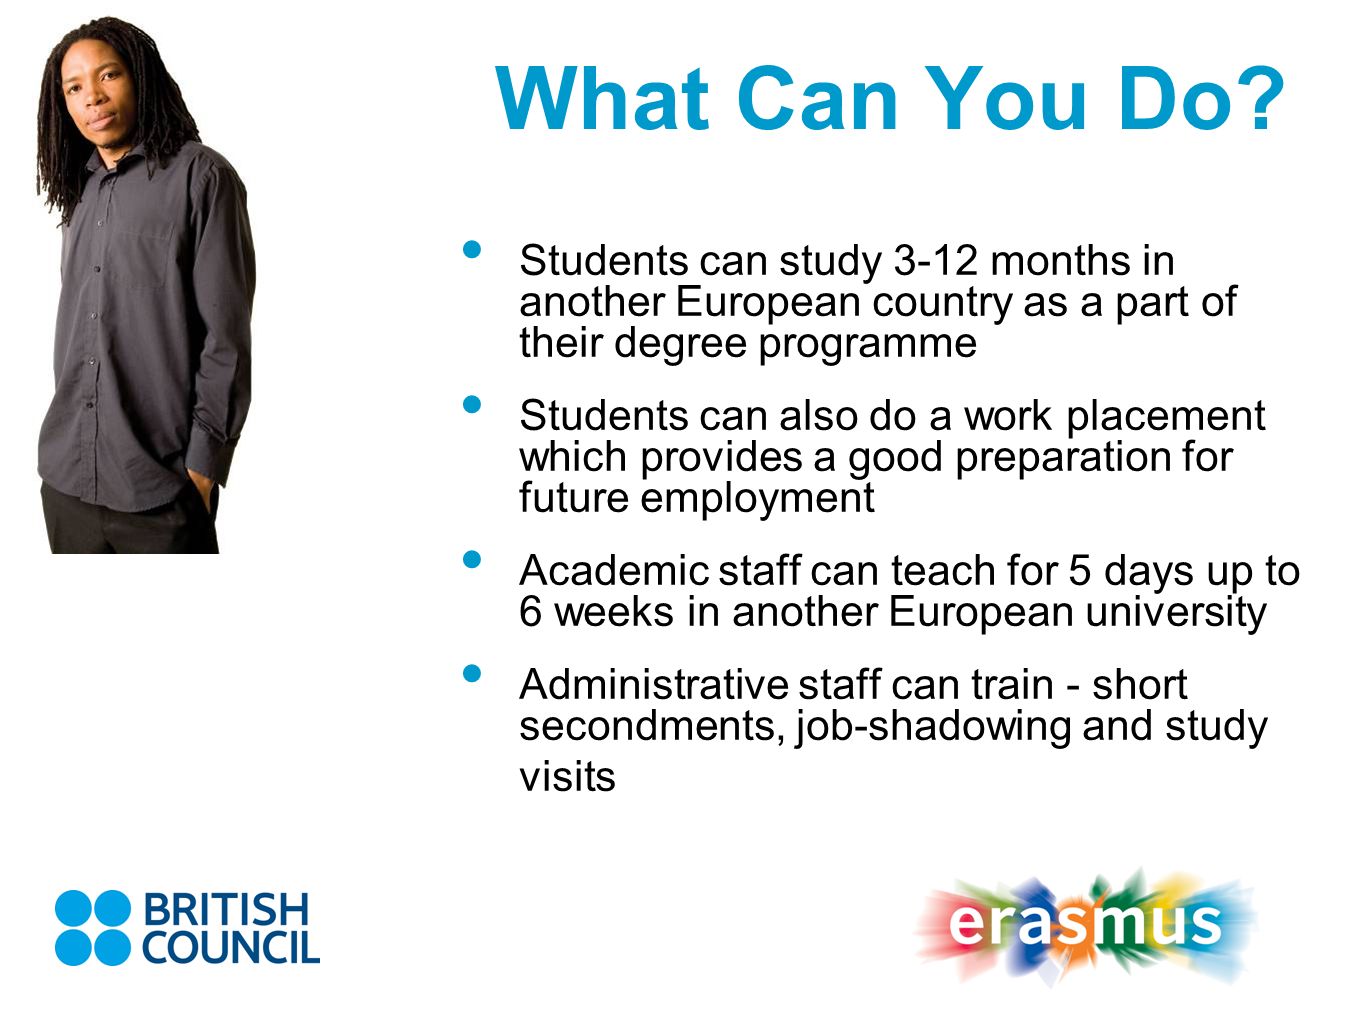 What Can You Do Students can study 3-12 months in another European country as a part of their degree programme.